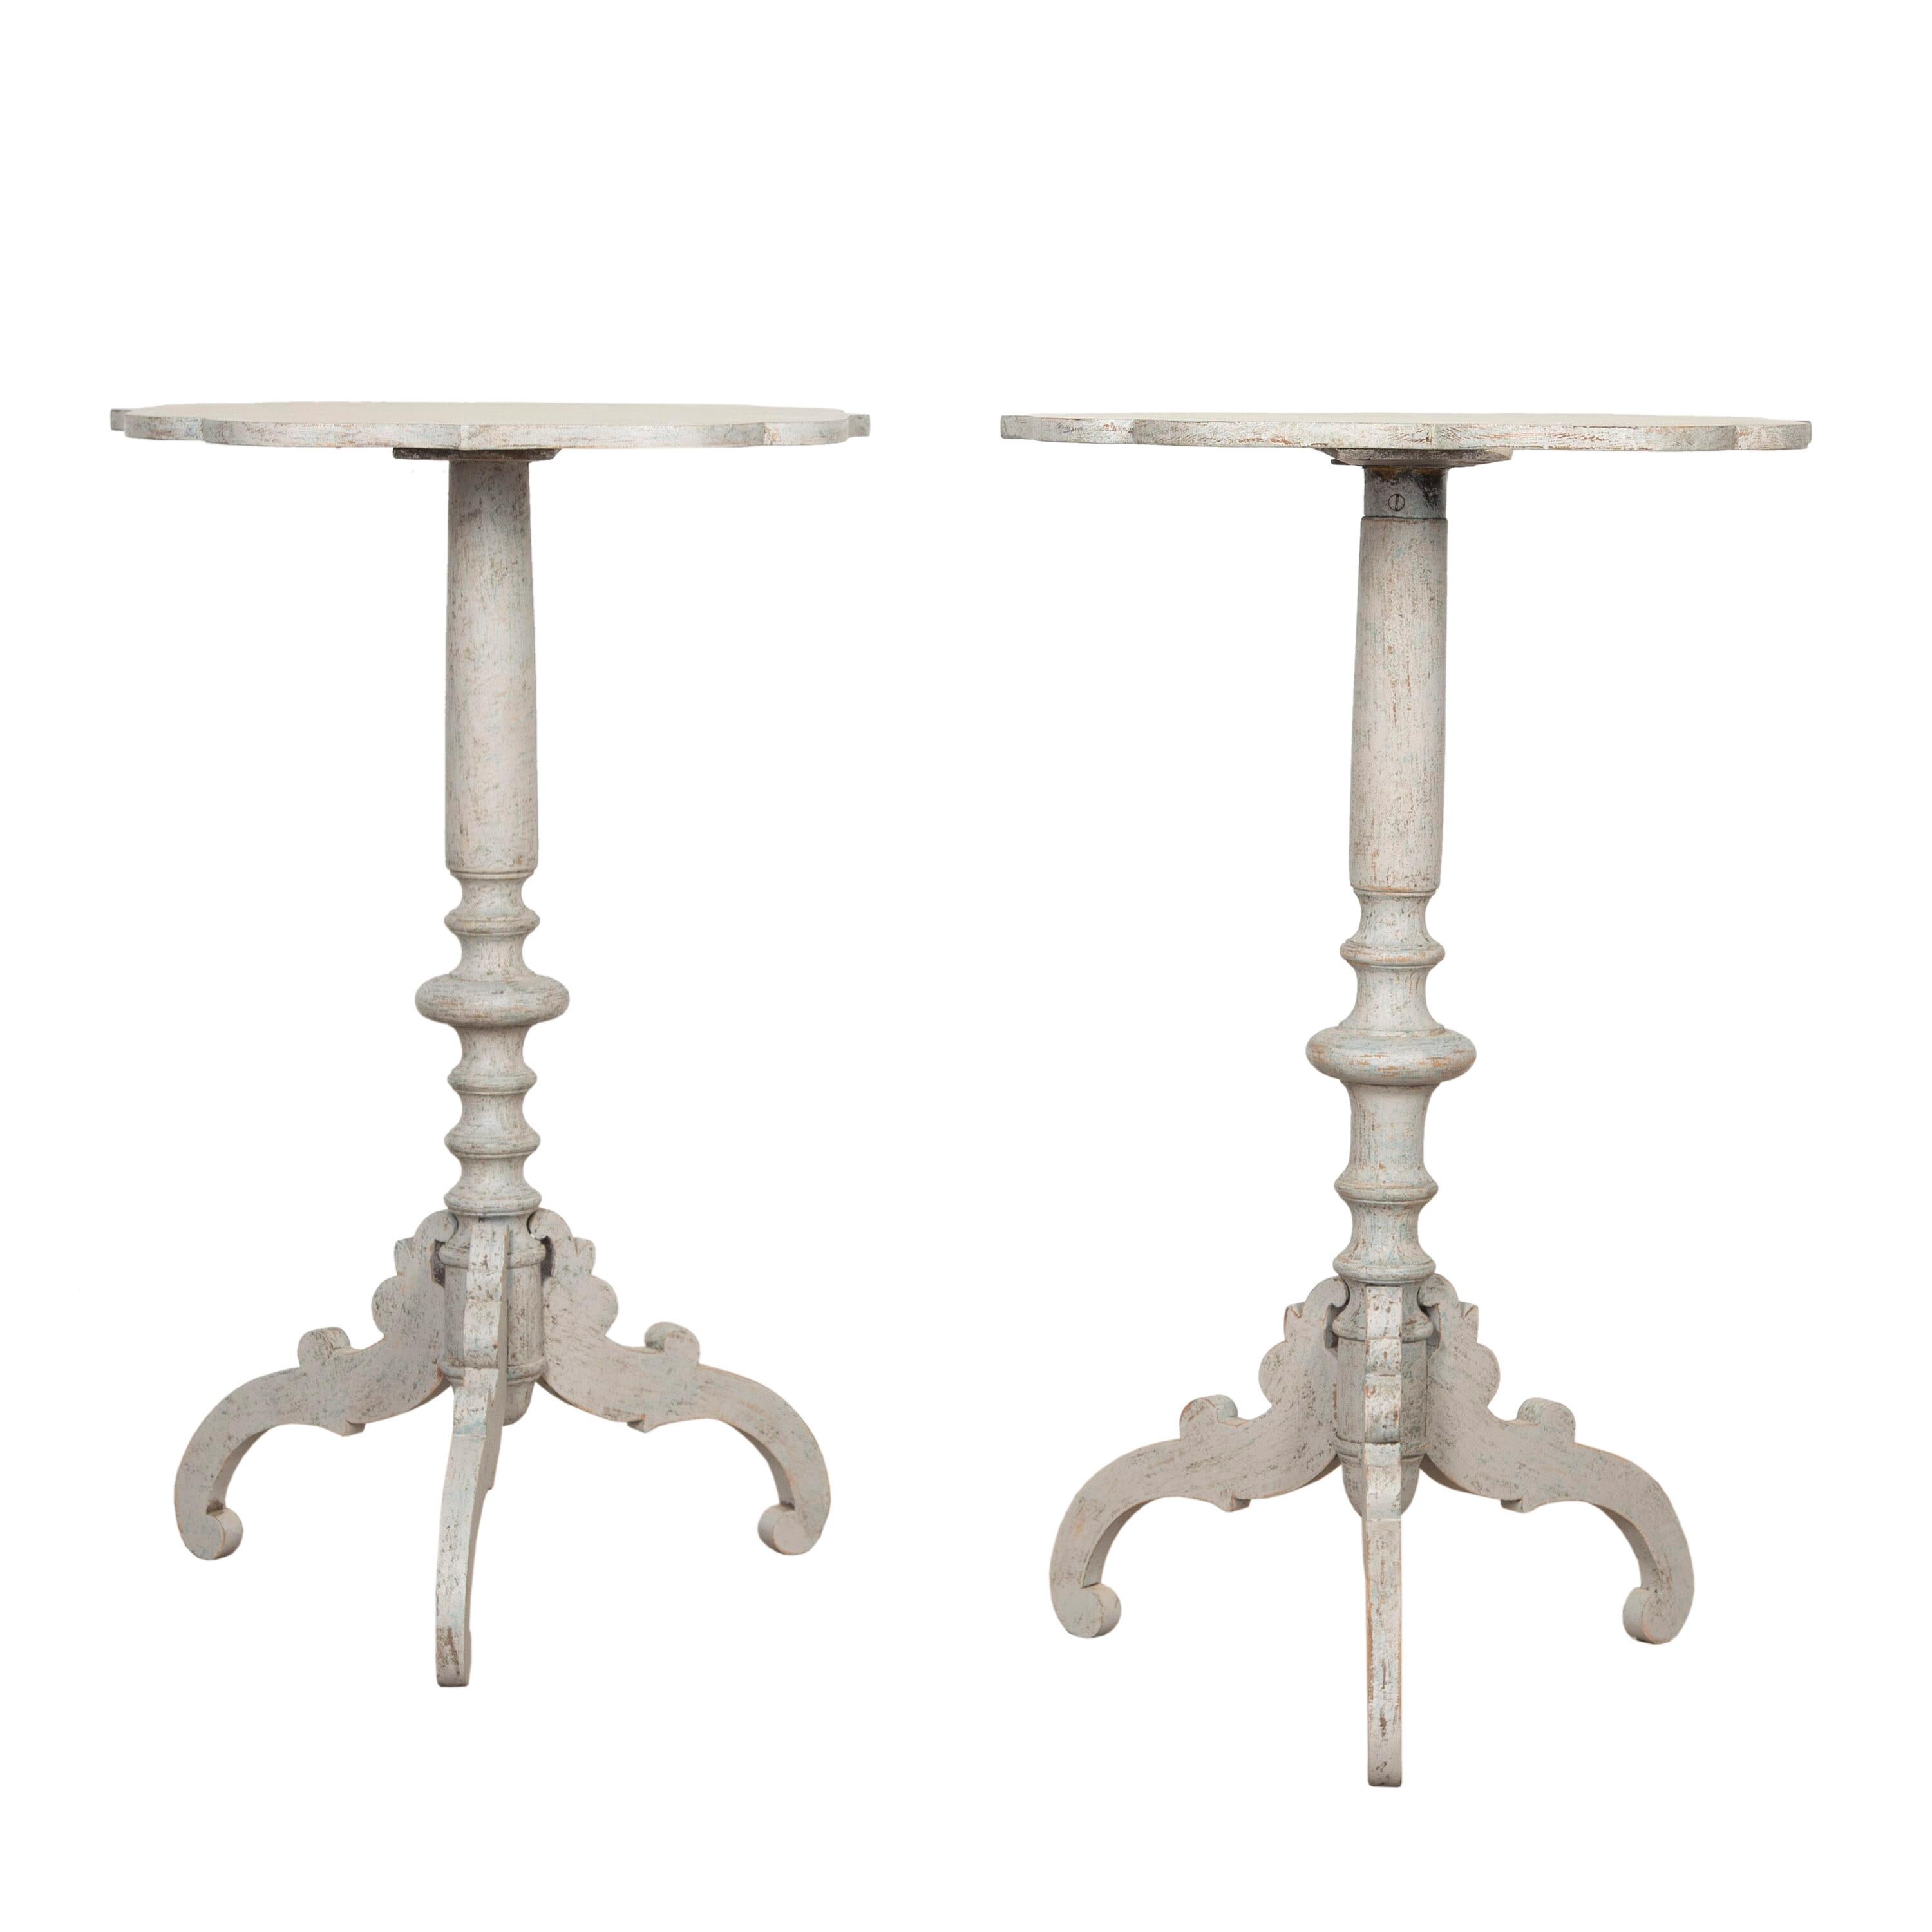 Pair of Swedish 19th Century tables. These wonderful tables have decorative tripod bases and stems which have been wonderfully turned to represent columns. Both have decorative tops with slightly scalloped edges! 
They have been re-painted with a